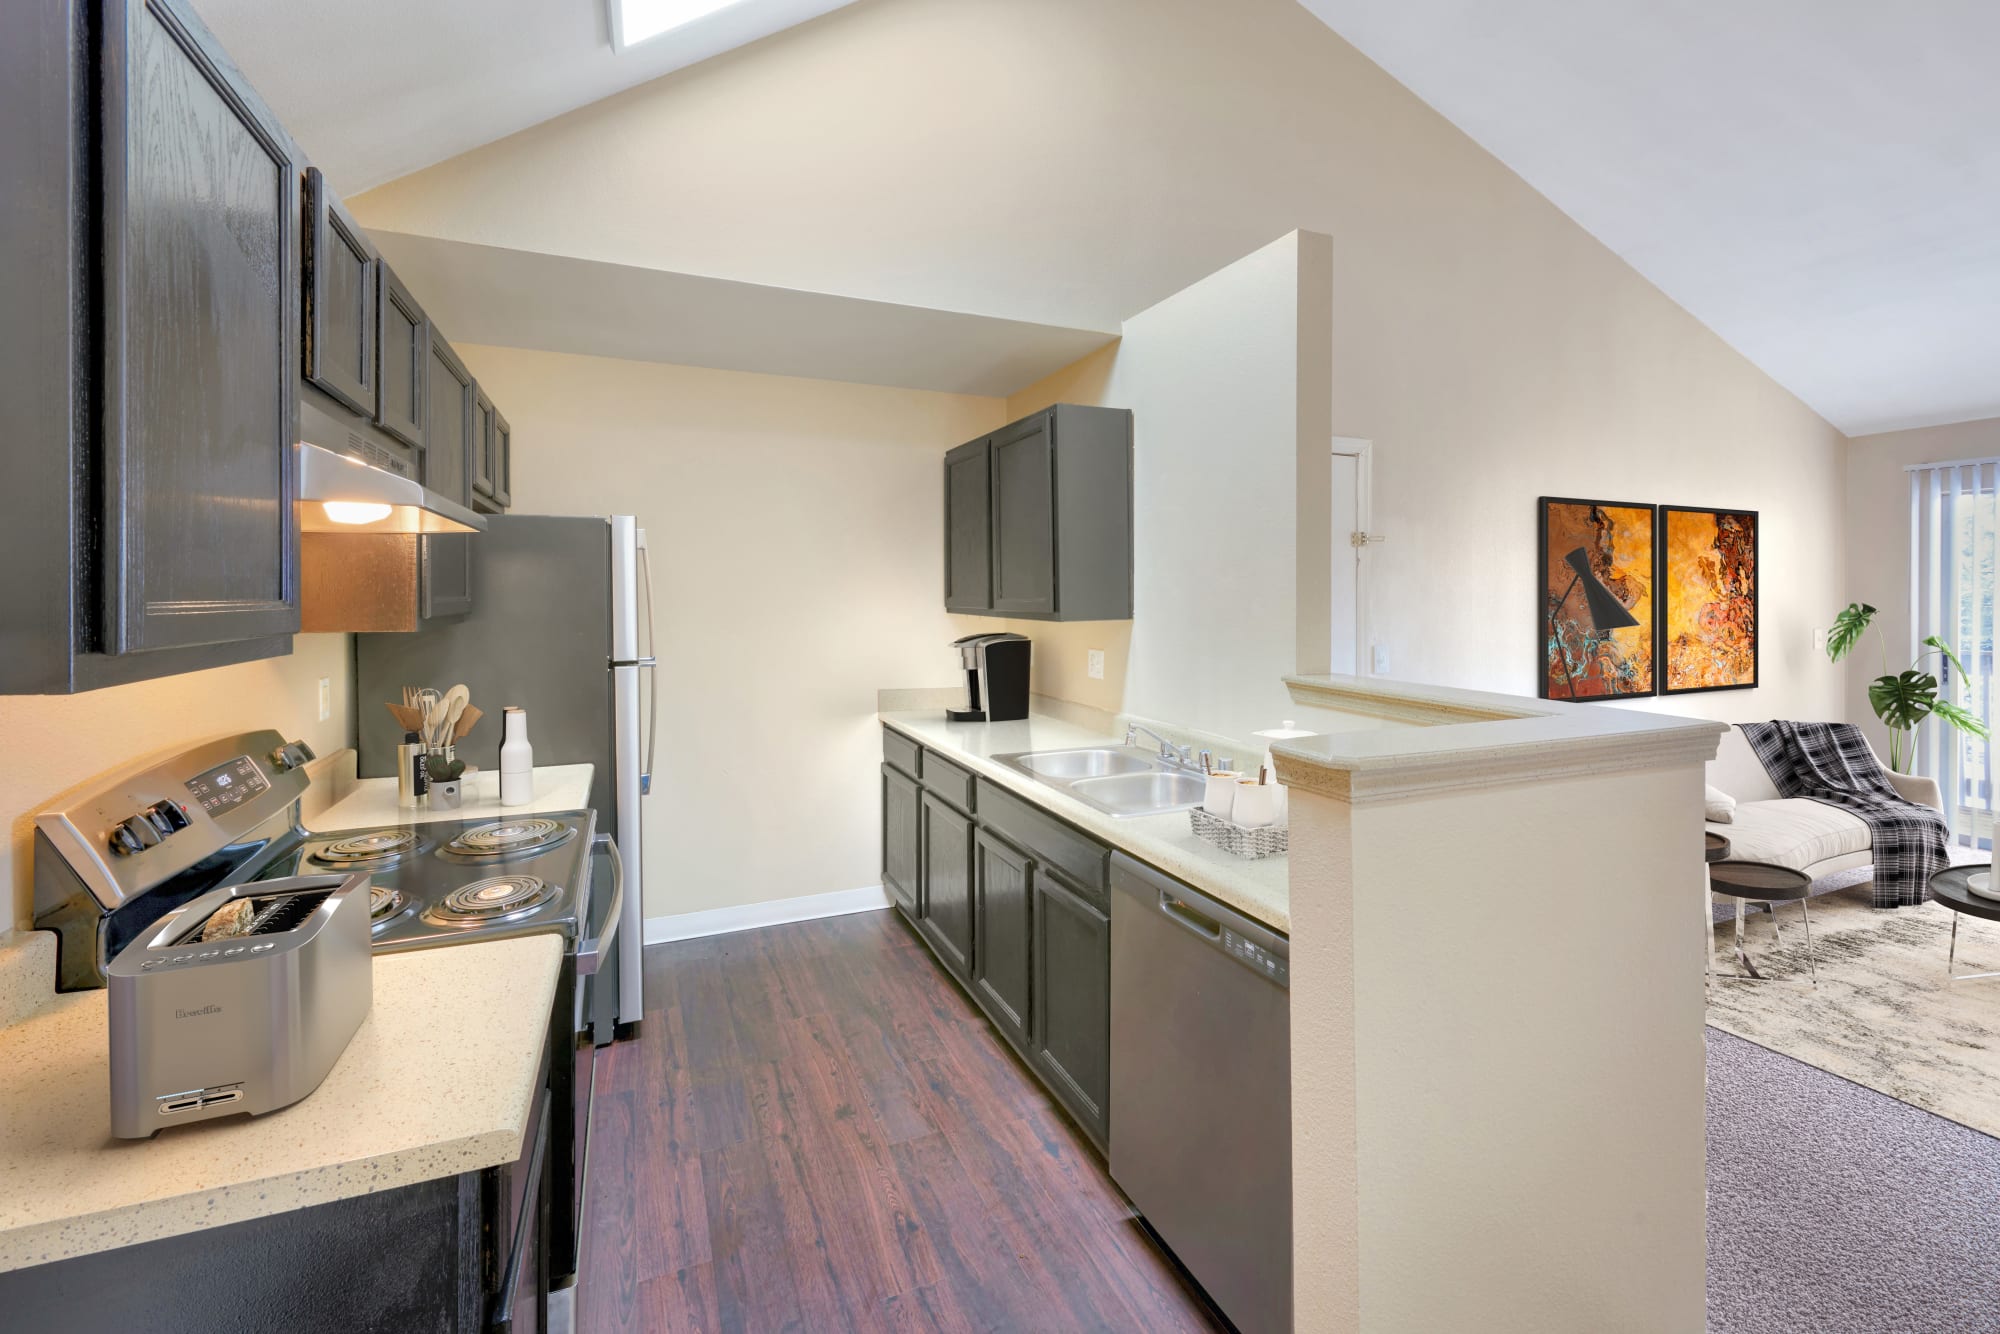 Kitchen and living room at Crossroads at City Center Apartments in Aurora, Colorado